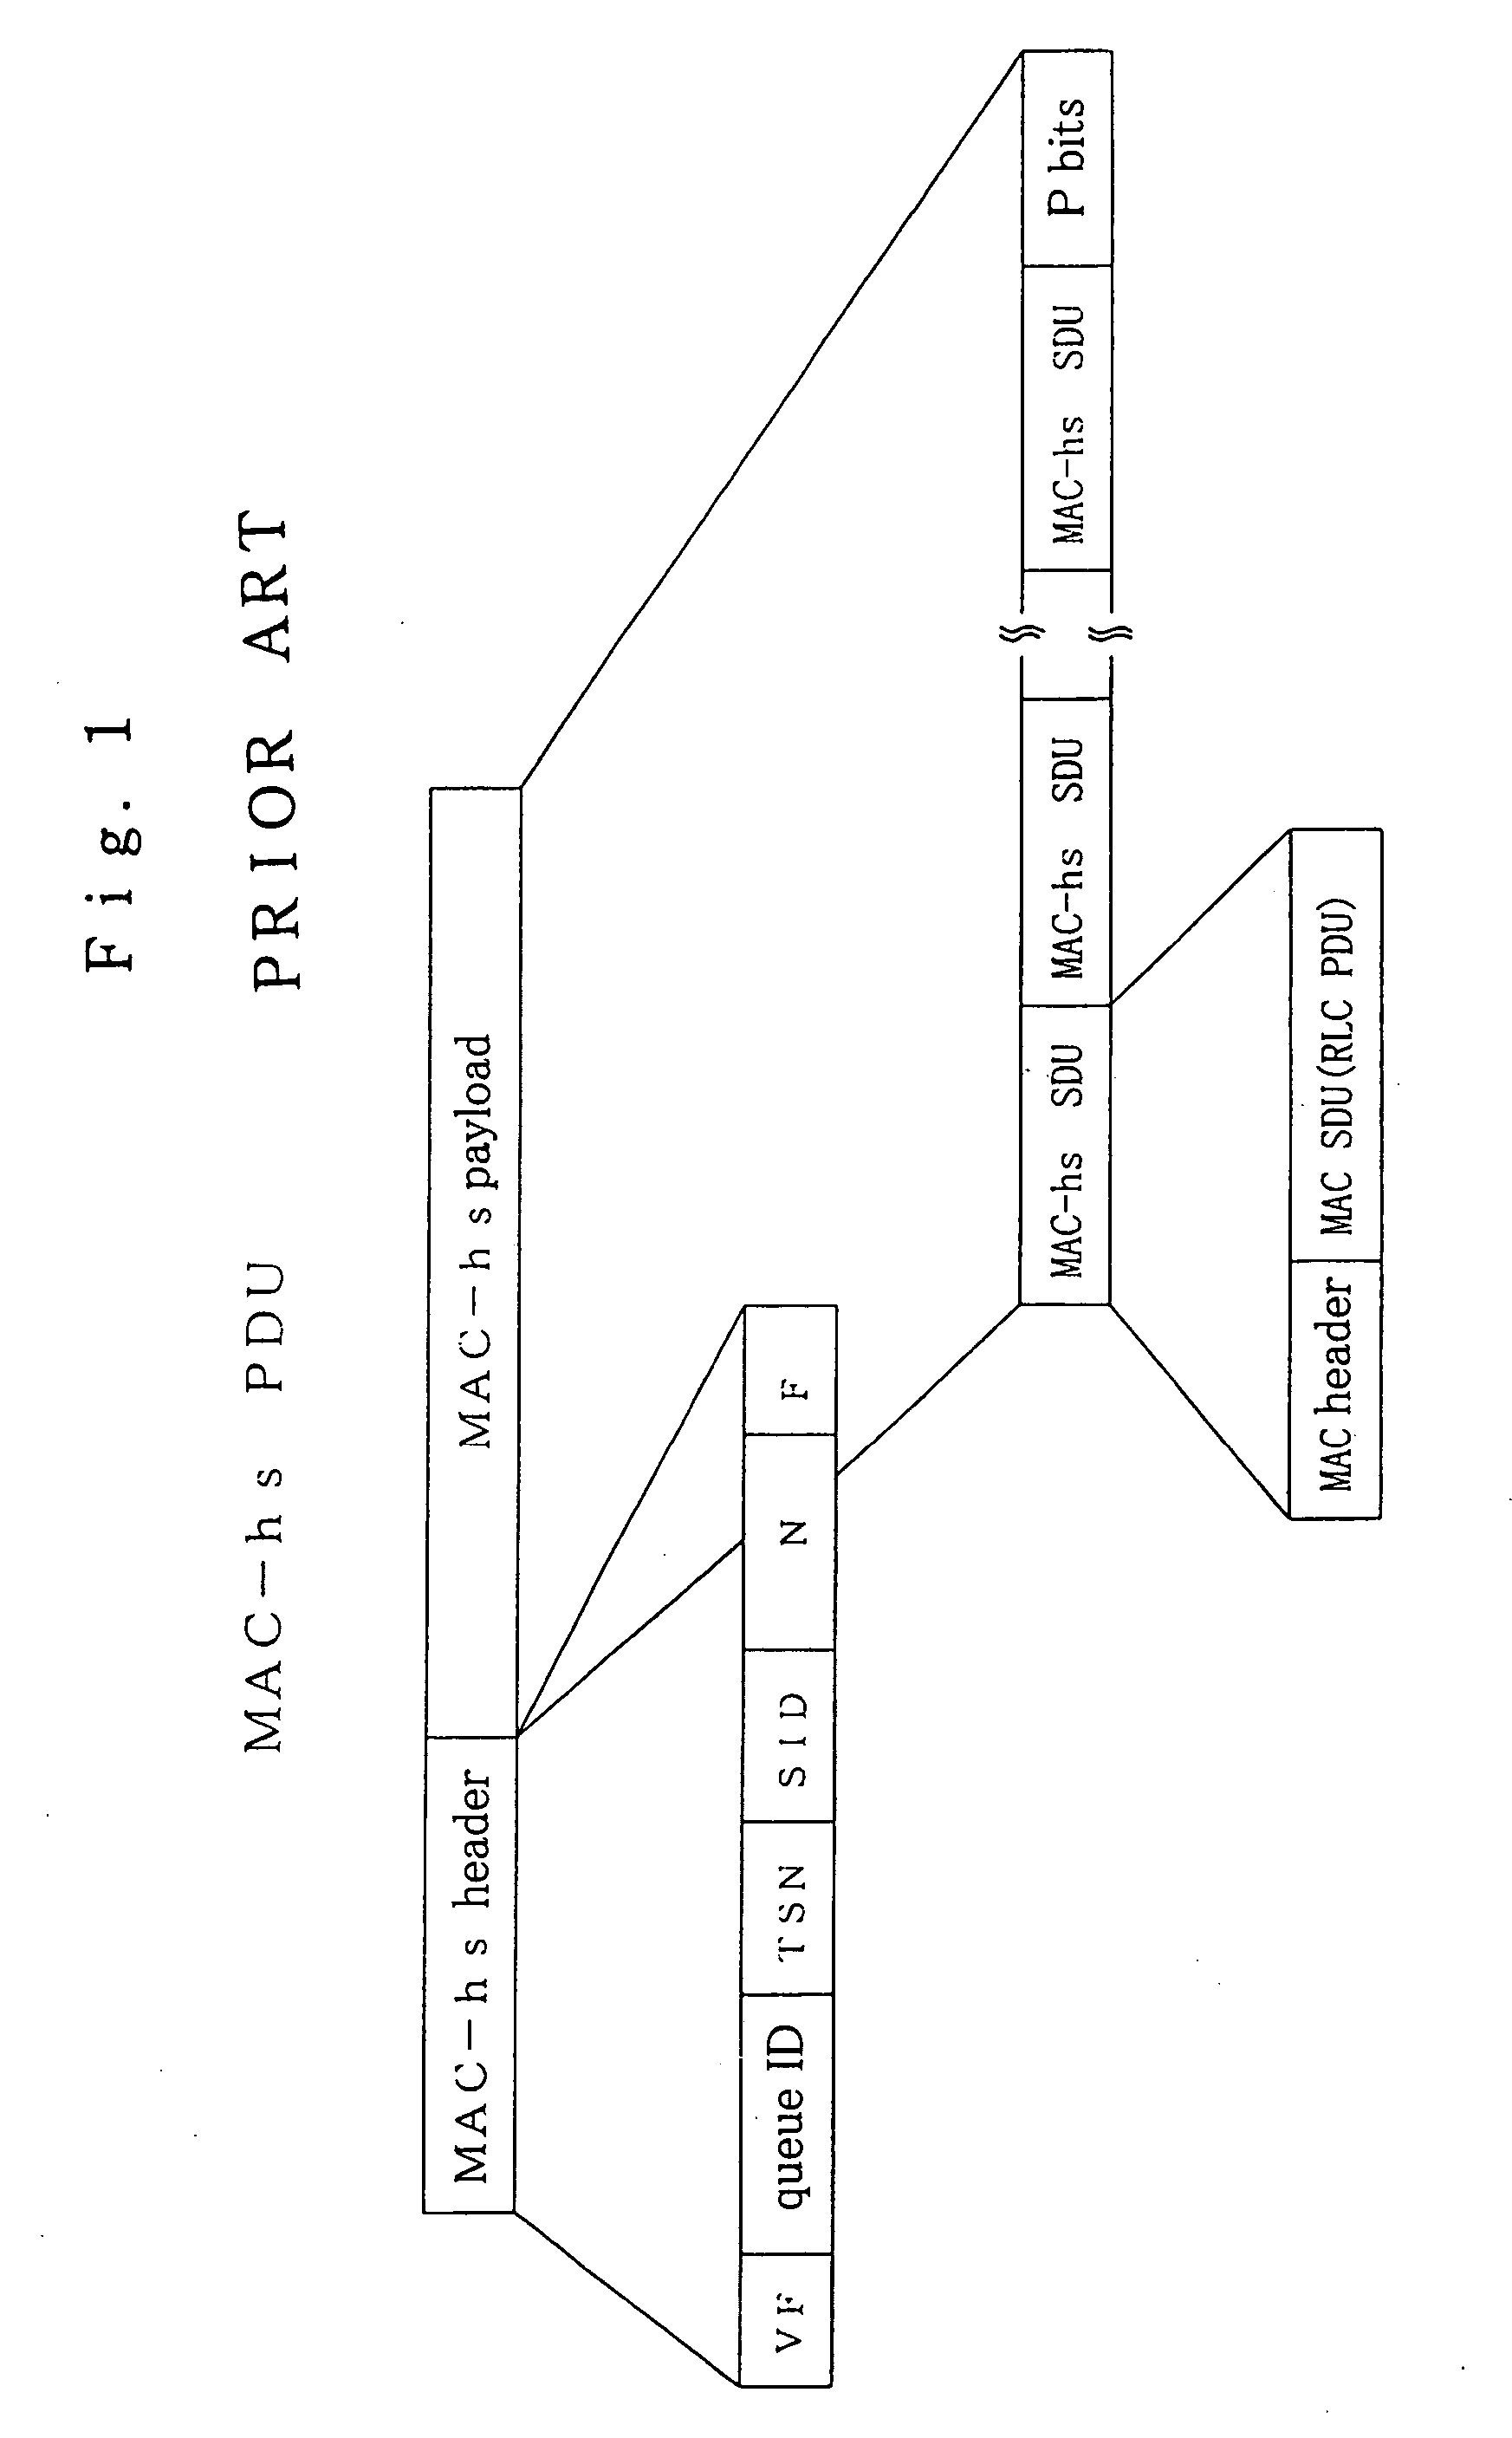 Mobile radio communication terminal device capable of realizing a MAC-HS buffer and RLC buffer in one physical memory and suppressing memory capacity